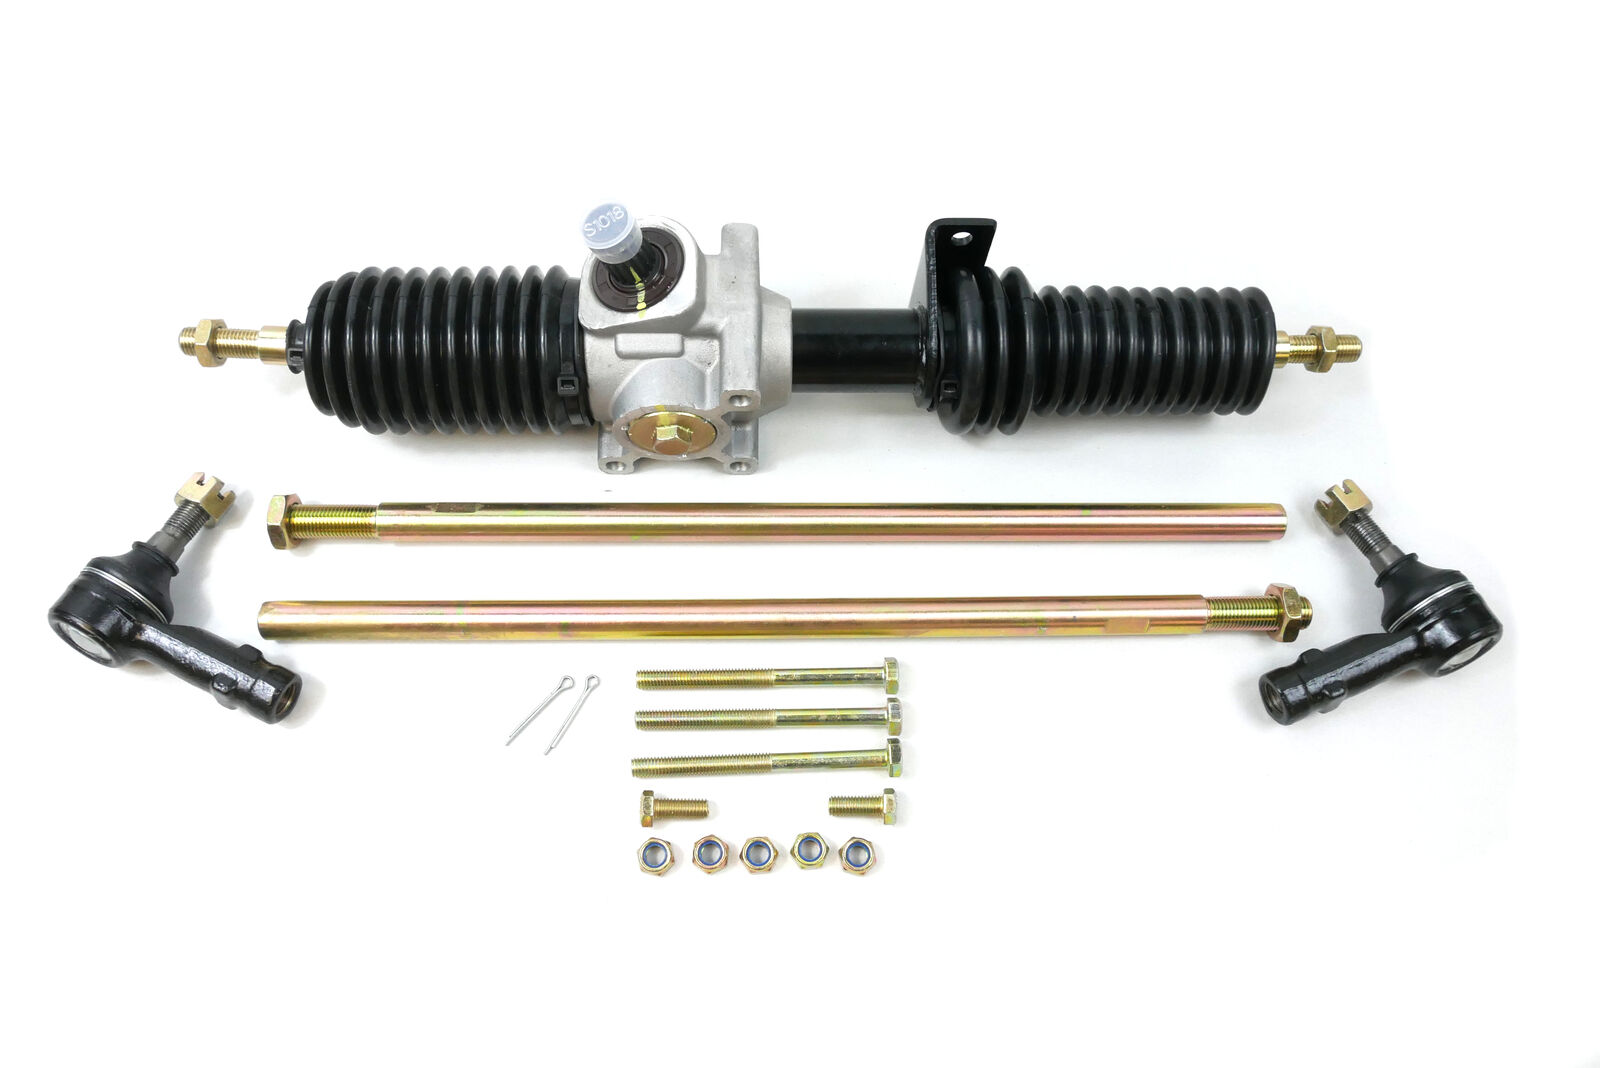 Rack & Pinion Steering Assembly for Polaris RZR XP 1000 & XP4 1000, 1824469